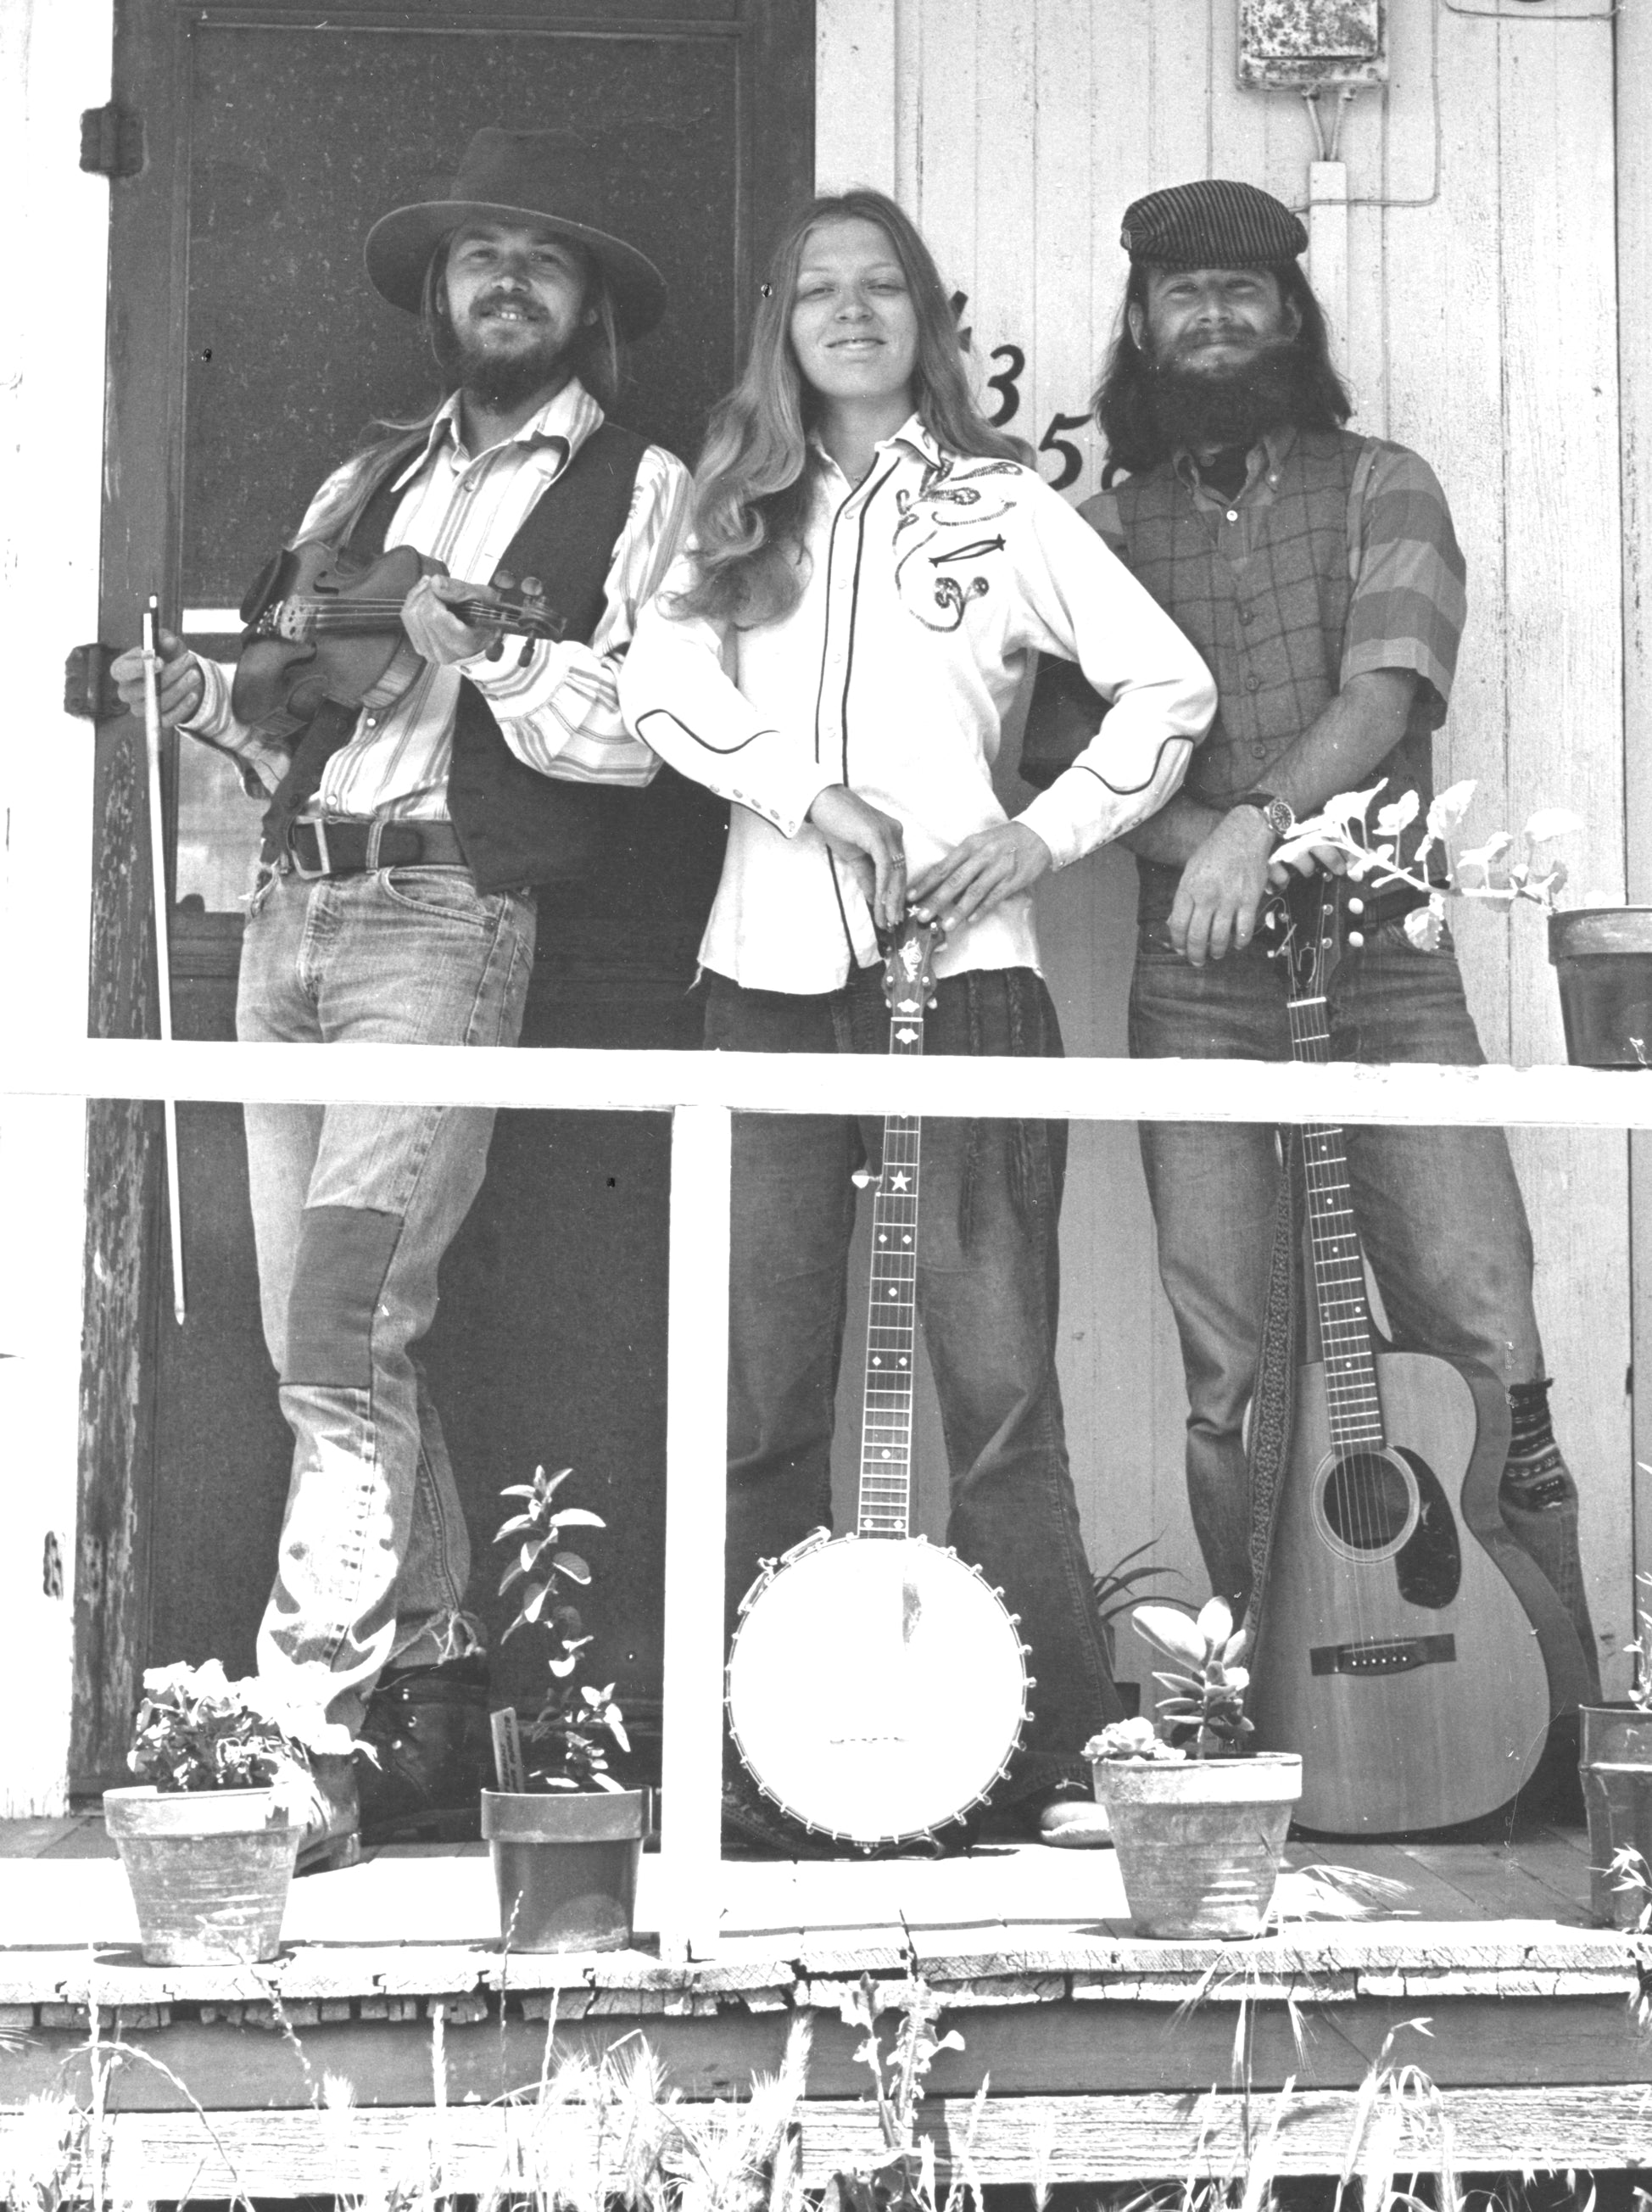 The Chicken Cheek Tweakers old time string band pose on the porch of Pam Ostergren(banjo) and David Brown's(fiddle) cottage in La Mesa, California, Ryan Thomson with guitar, 1974